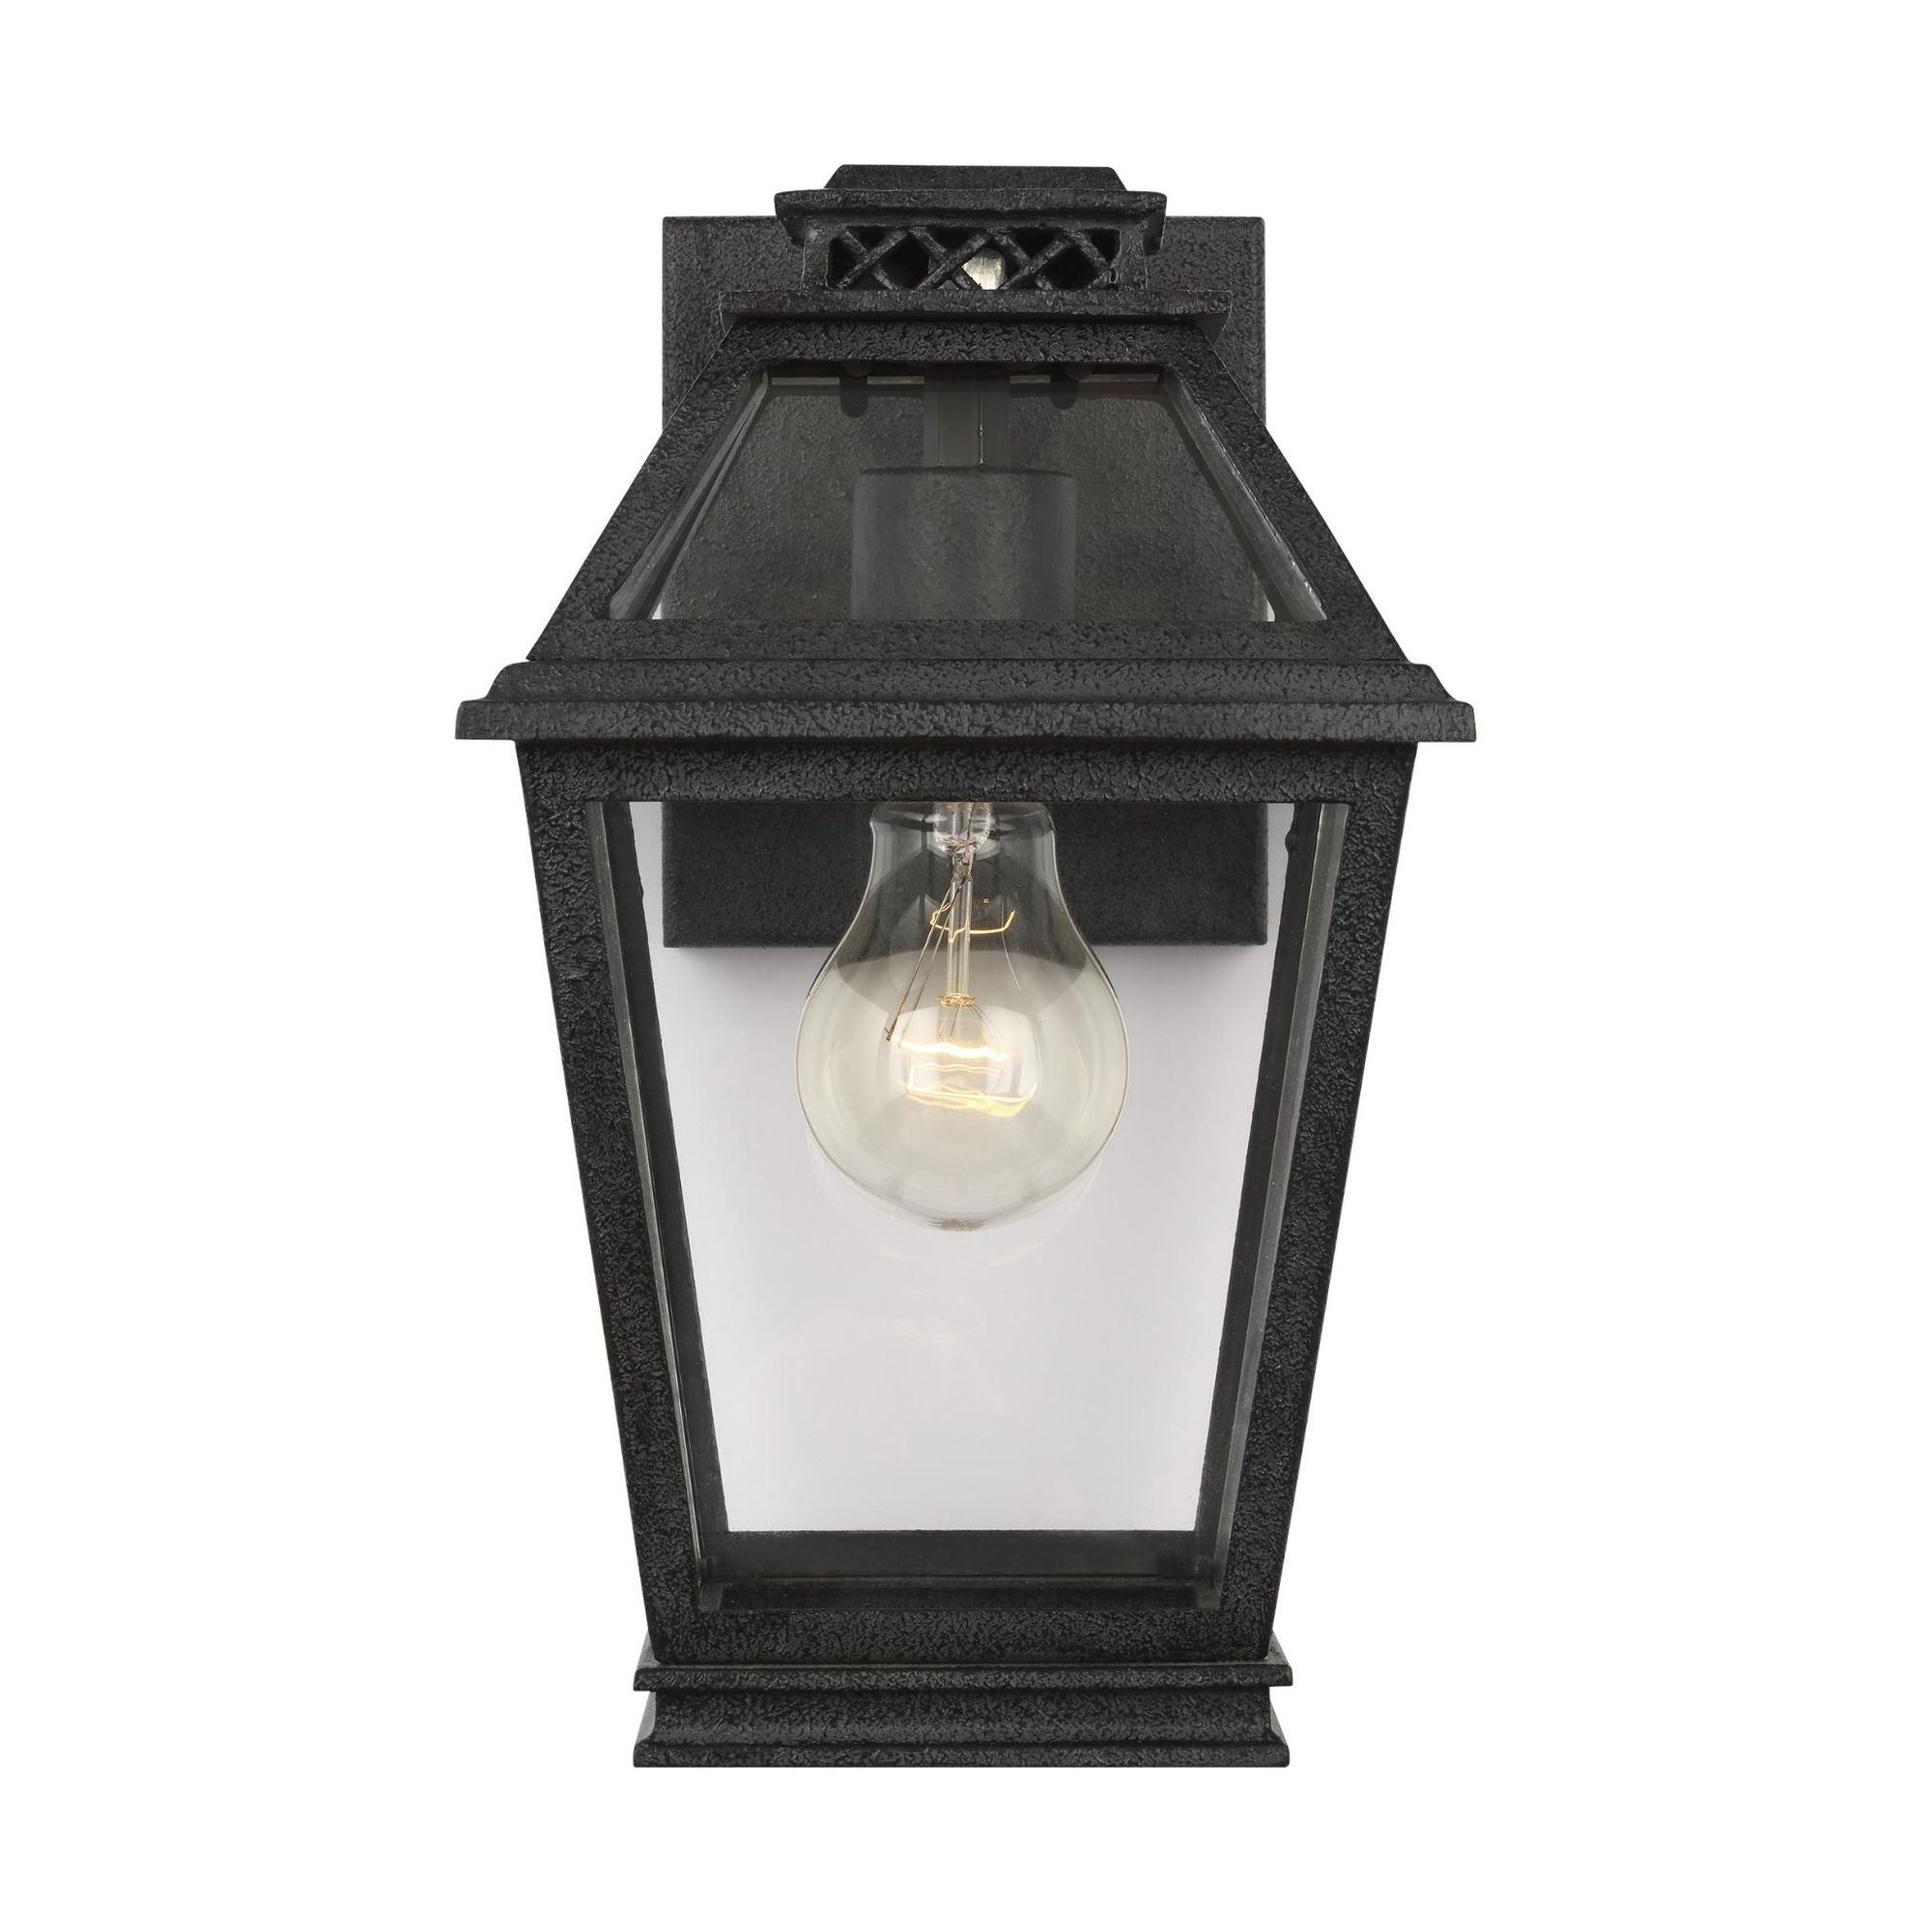 Chapman & Myers Falmouth Extra Small Outdoor Wall Lantern in Dark Weathered Zinc